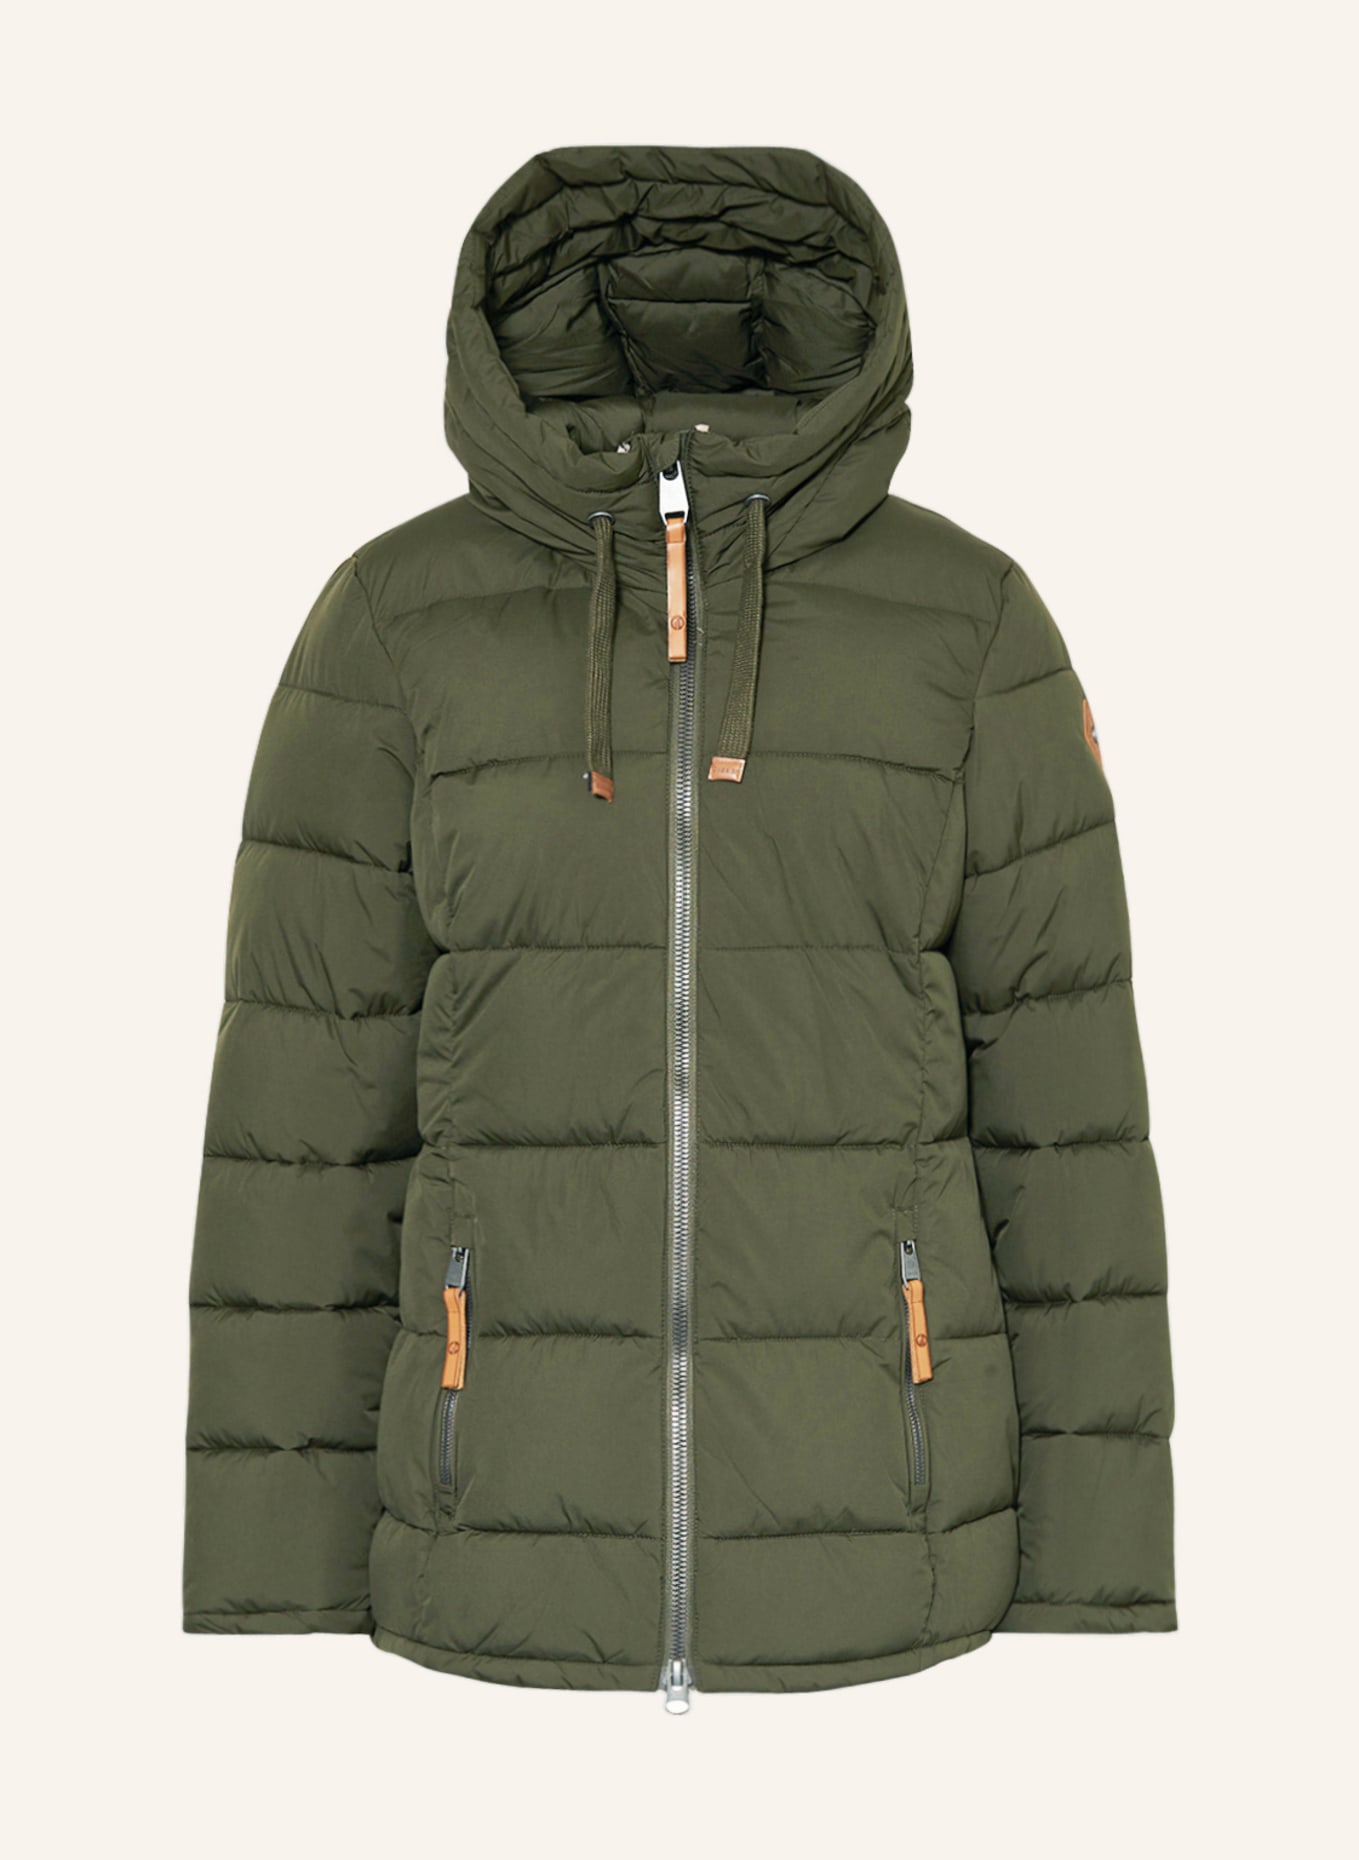 G.I.G.A. DX by killtec Quilted jacket in olive | Windbreakers